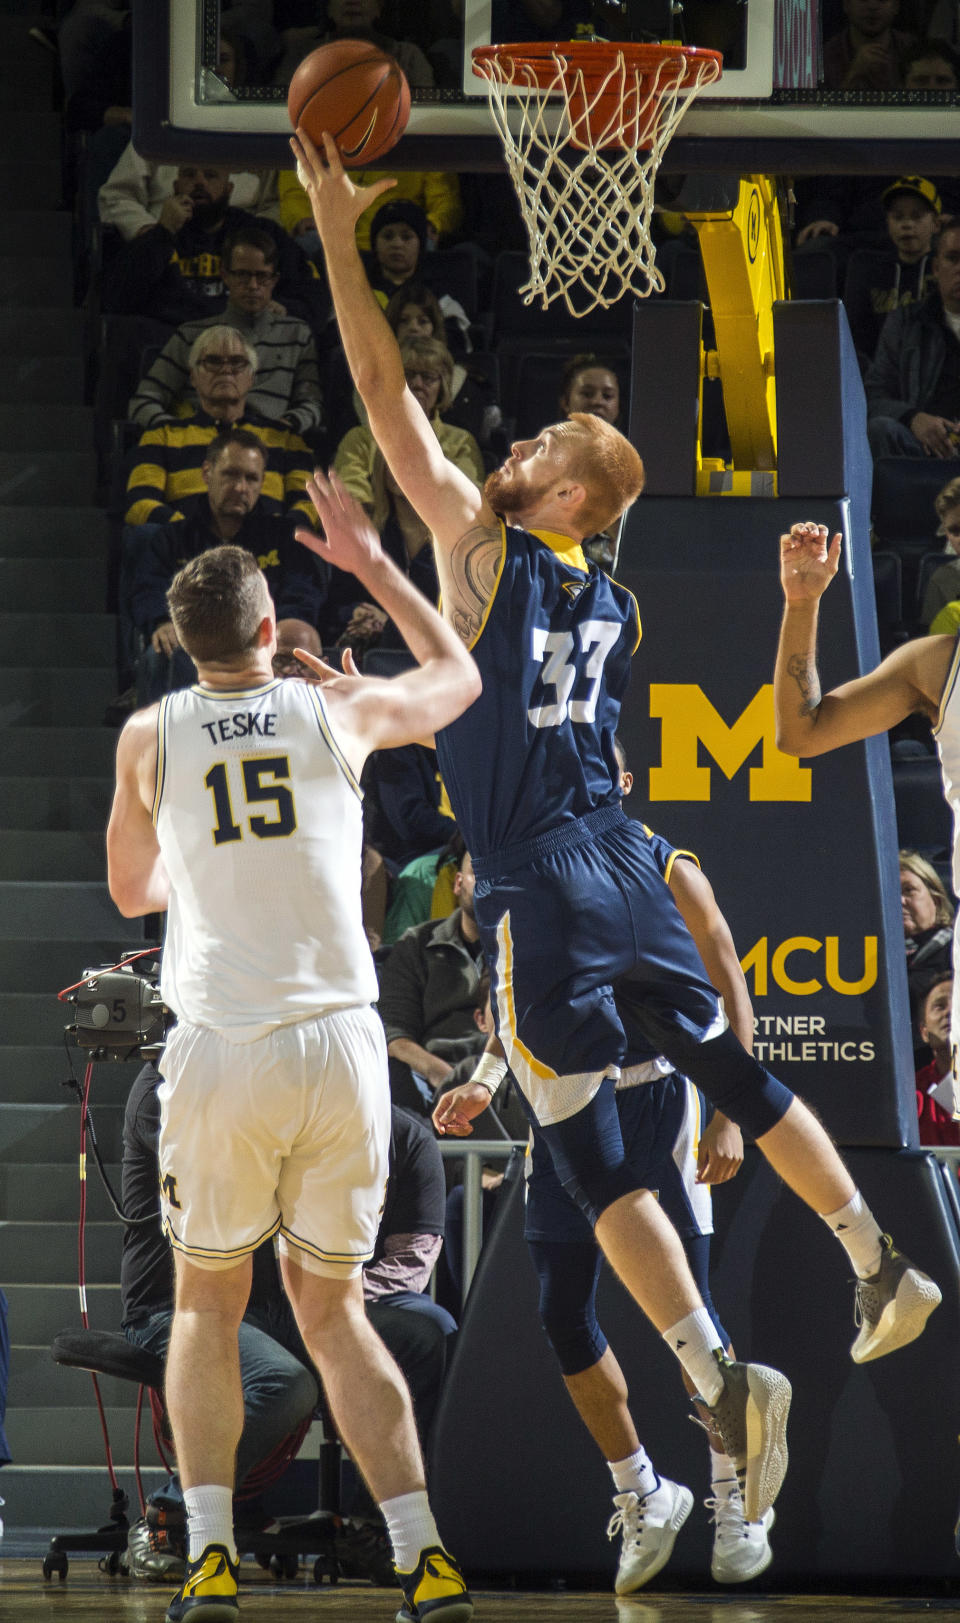 Chattanooga center Thomas Smallwood (33) makes a layup whiledefended by Michigan center Jon Teske (15) in the first half of an NCAA college basketball game at Crisler Center in Ann Arbor, Mich., Friday, Nov. 23, 2018. (AP Photo/Tony Ding)